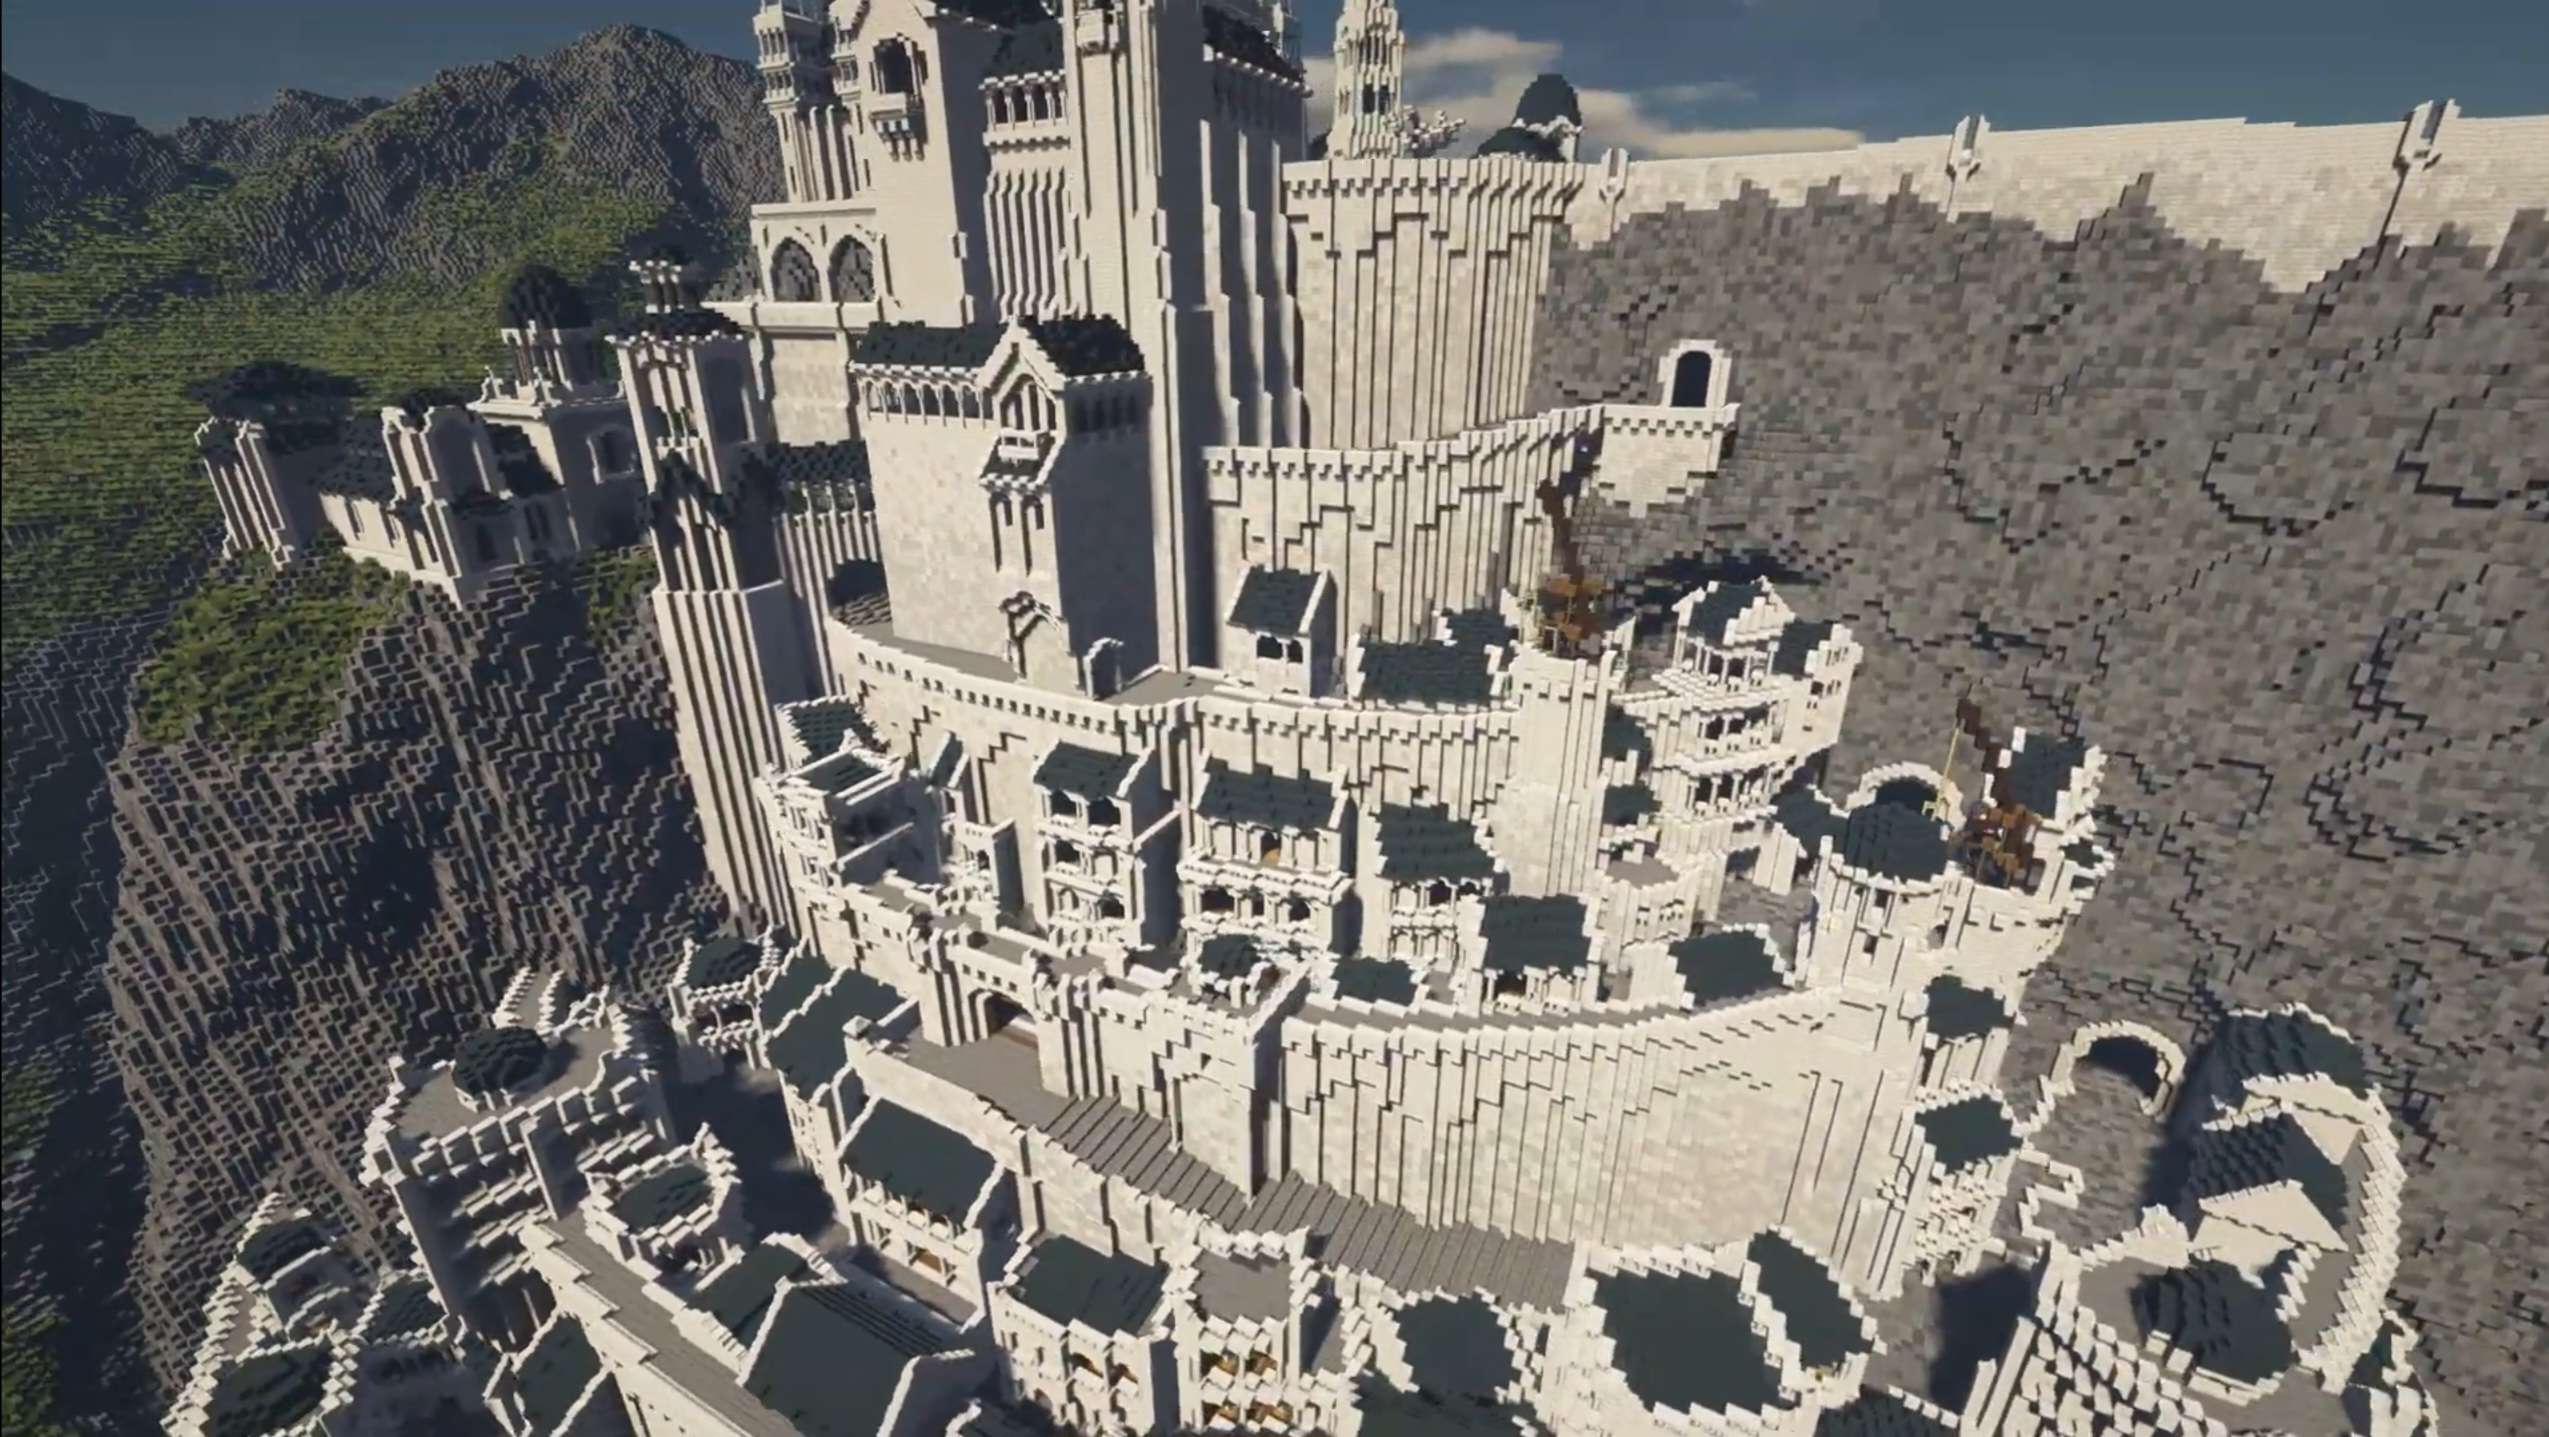 Minas tirith, city in middle-earth in lord of the rings books, movies